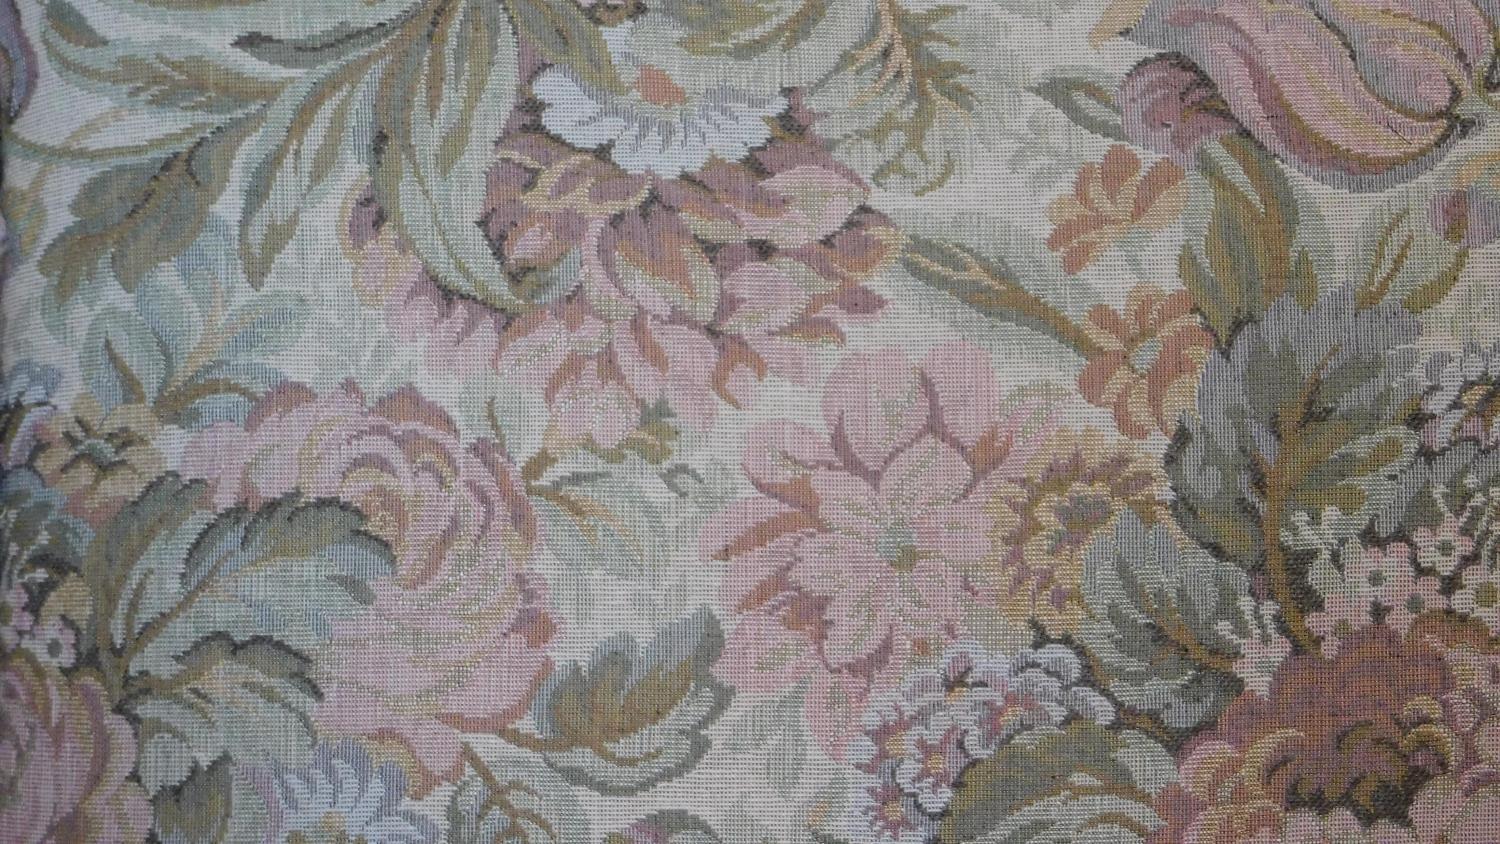 An Edwardian two seater sofa in floral tassled upholstery. 76x137x77cm - Image 6 of 6